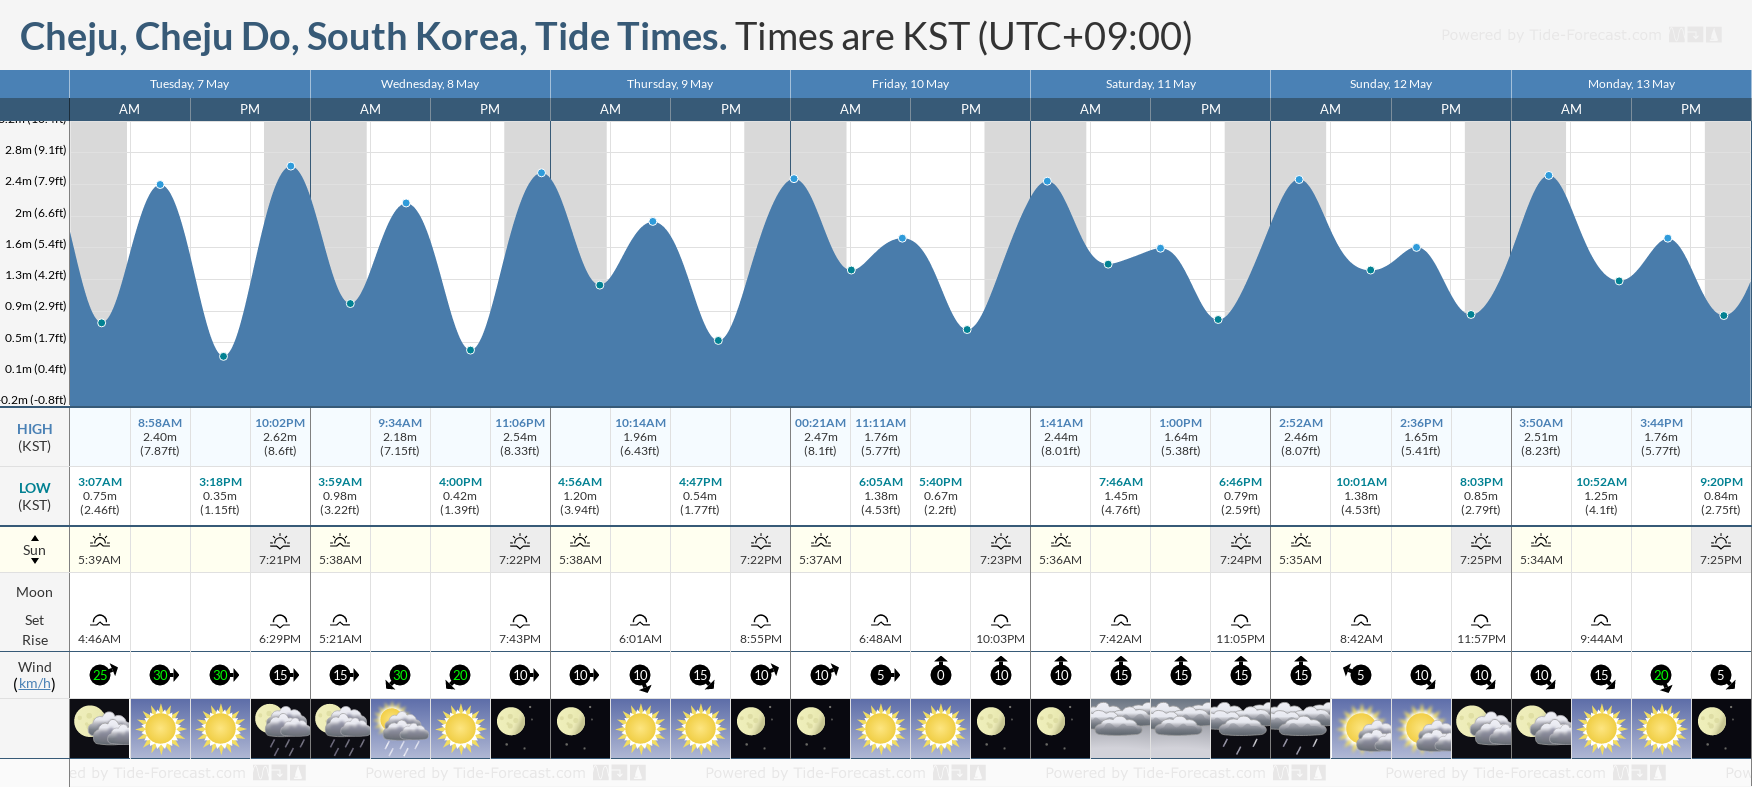 Cheju, Cheju Do, South Korea Tide Chart including high and low tide tide times for the next 7 days